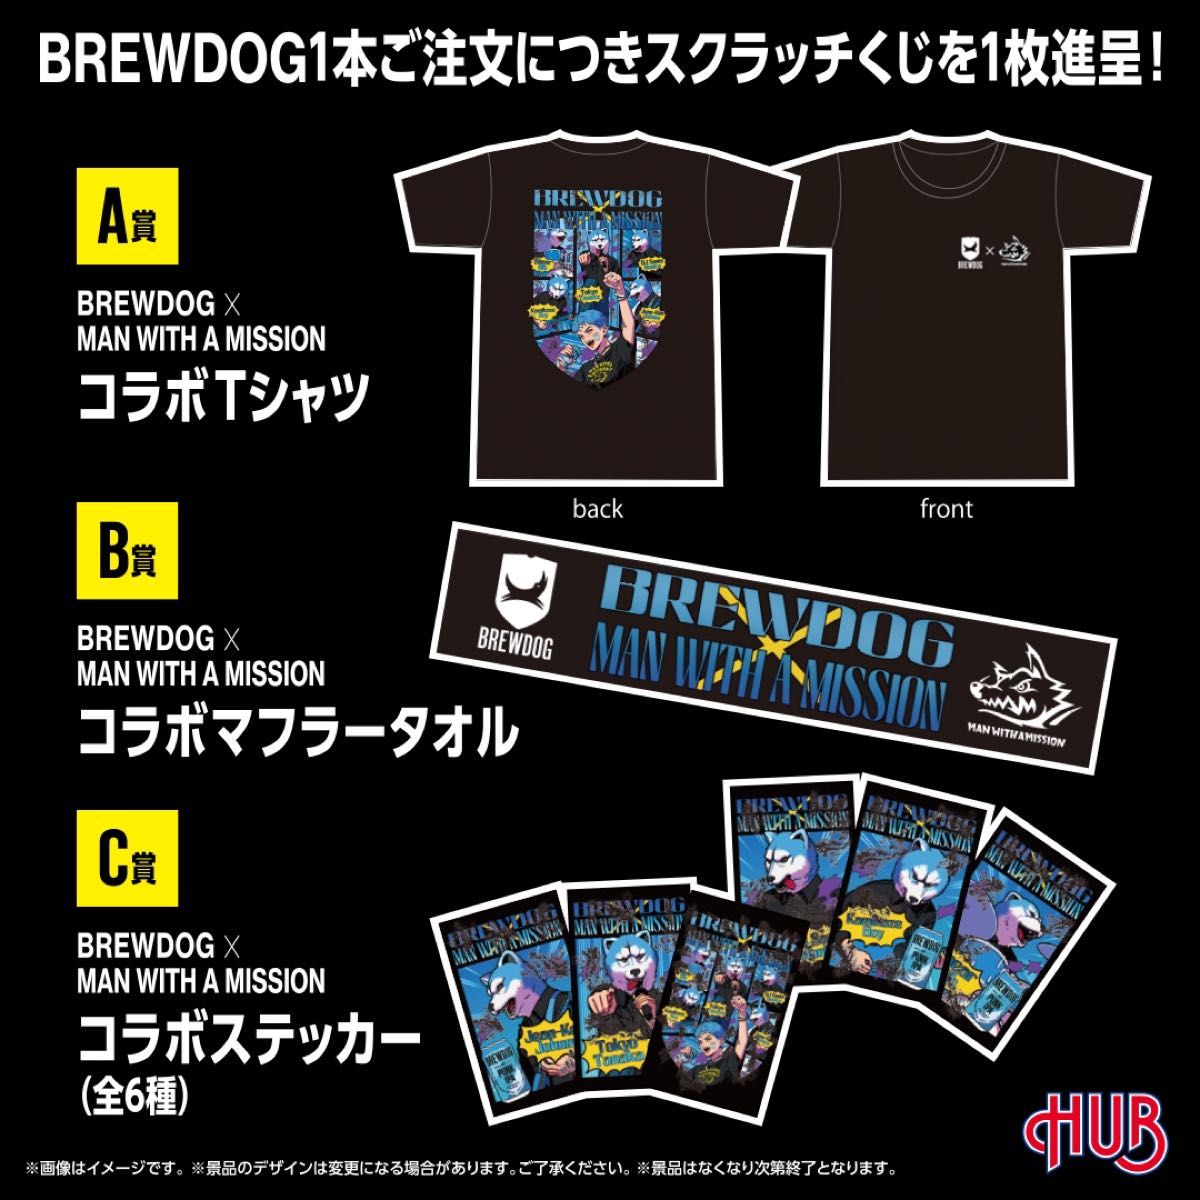 BREWDOG×MAN WITH A MISSION タオル マンウィズ - 通販 - fpower.com.br